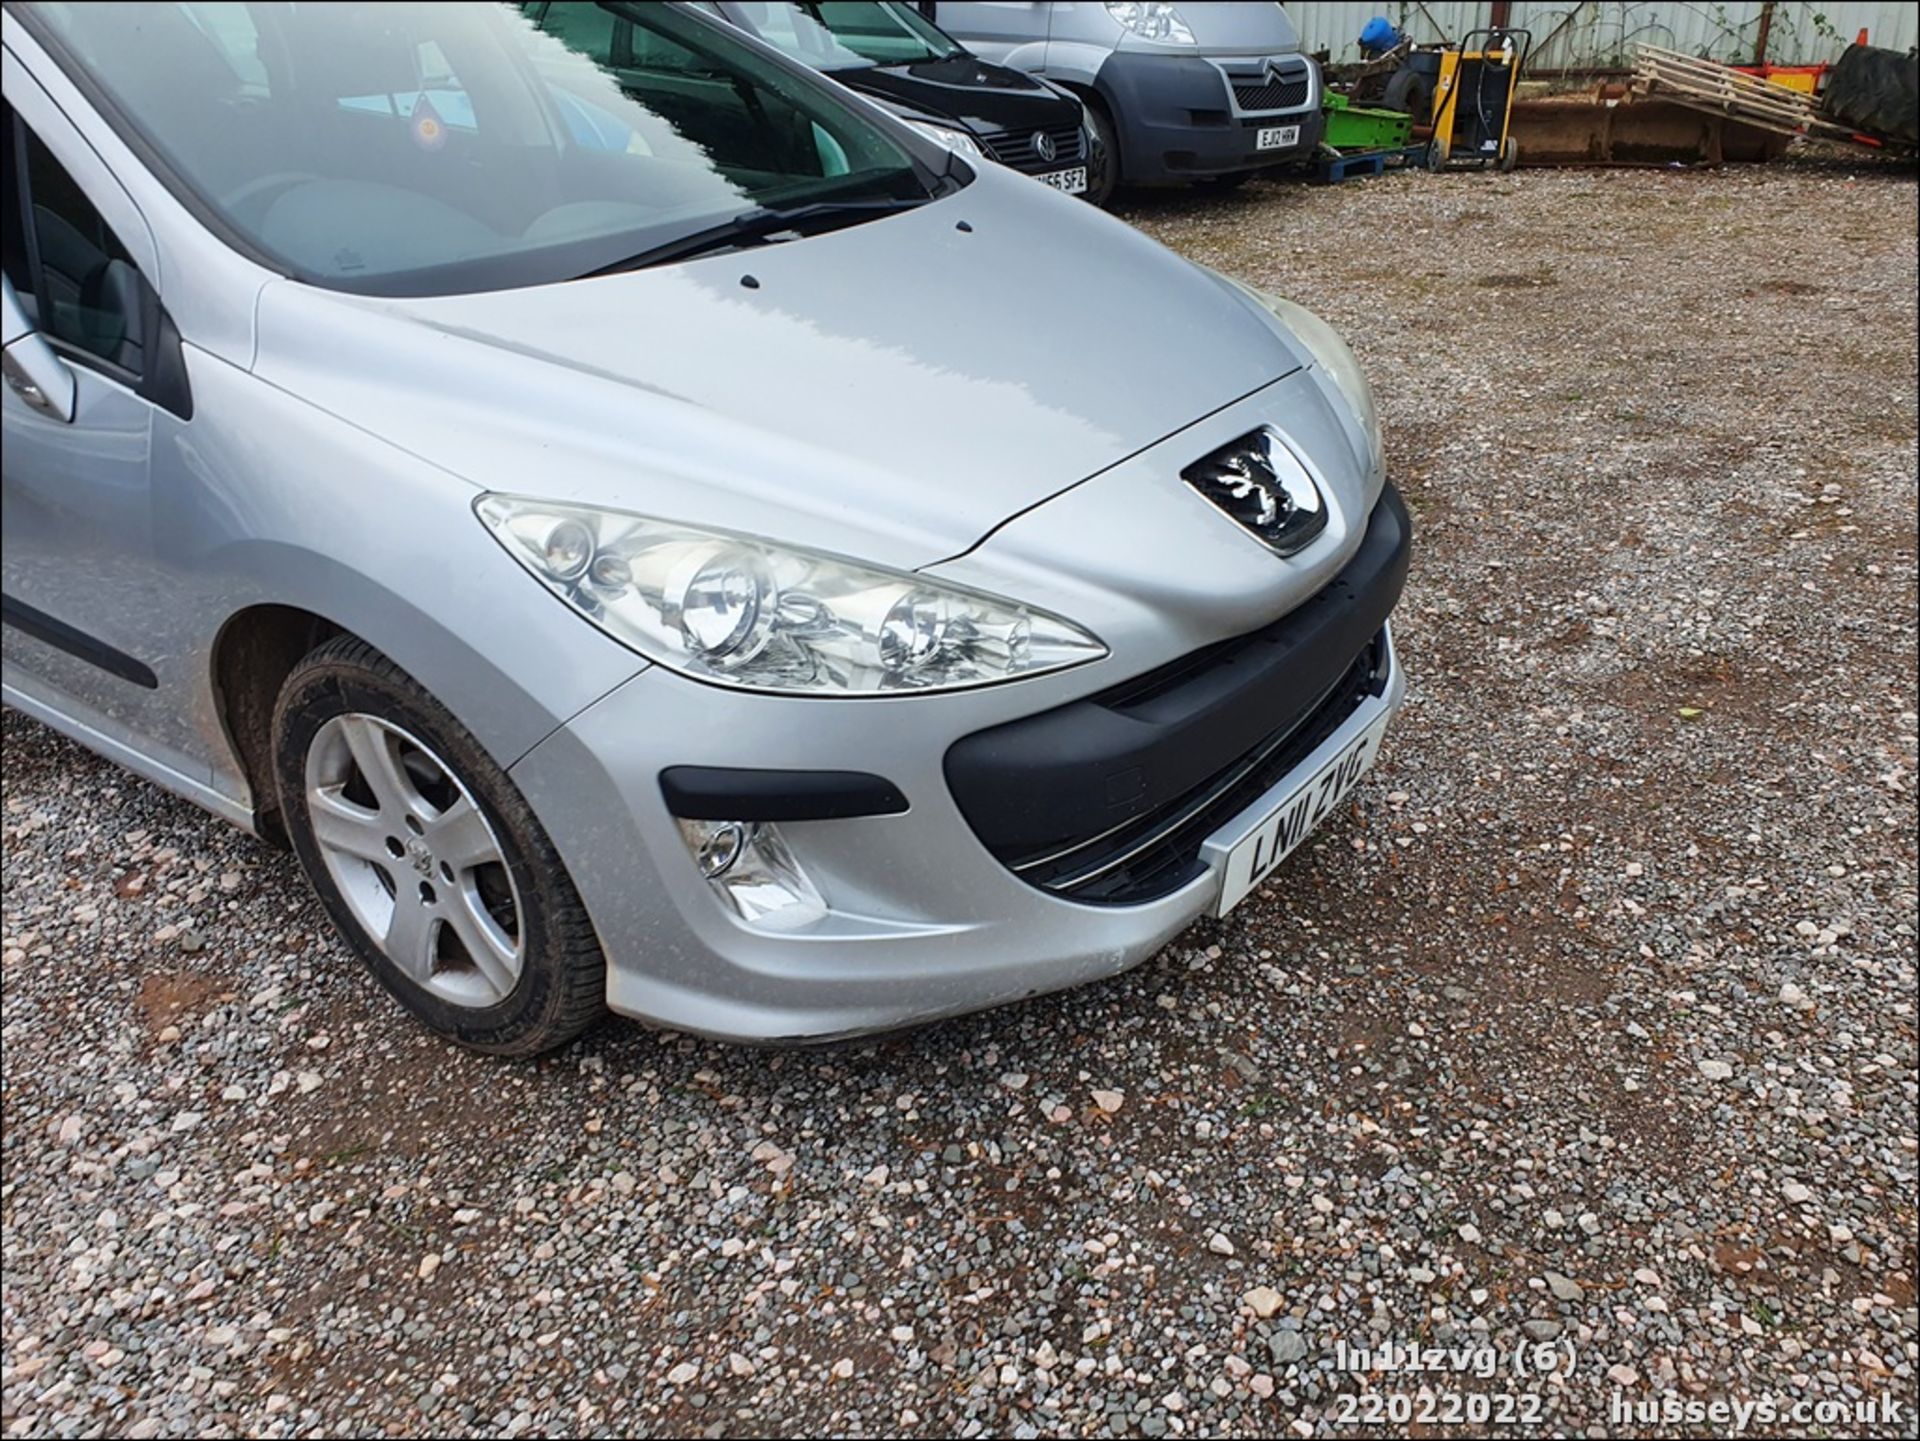 11/11 PEUGEOT 308 S SW HDI 92 - 1560cc 5dr Estate (Silver, 115k) - Image 7 of 46